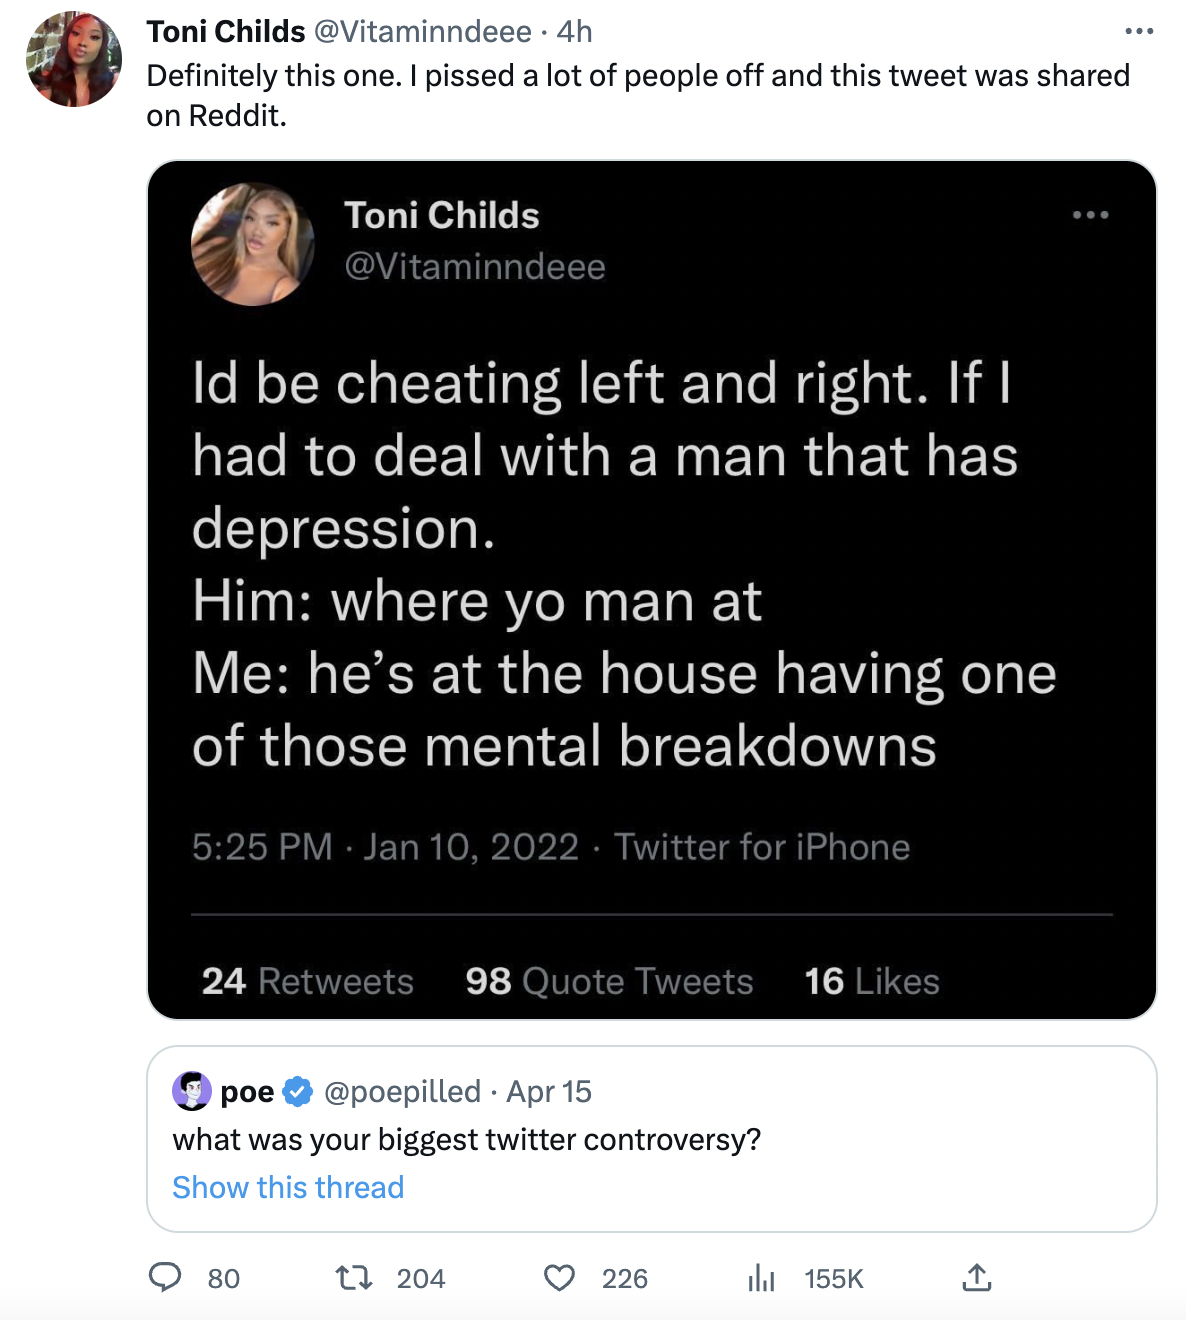 controversial tweets - multimedia -e. I pissed a lot of people off and this tweet was d on Reddit. Toni Childs ld be cheating left and right. If I had to deal with a man that has depression. Him where yo man at Me he's at the house having one o